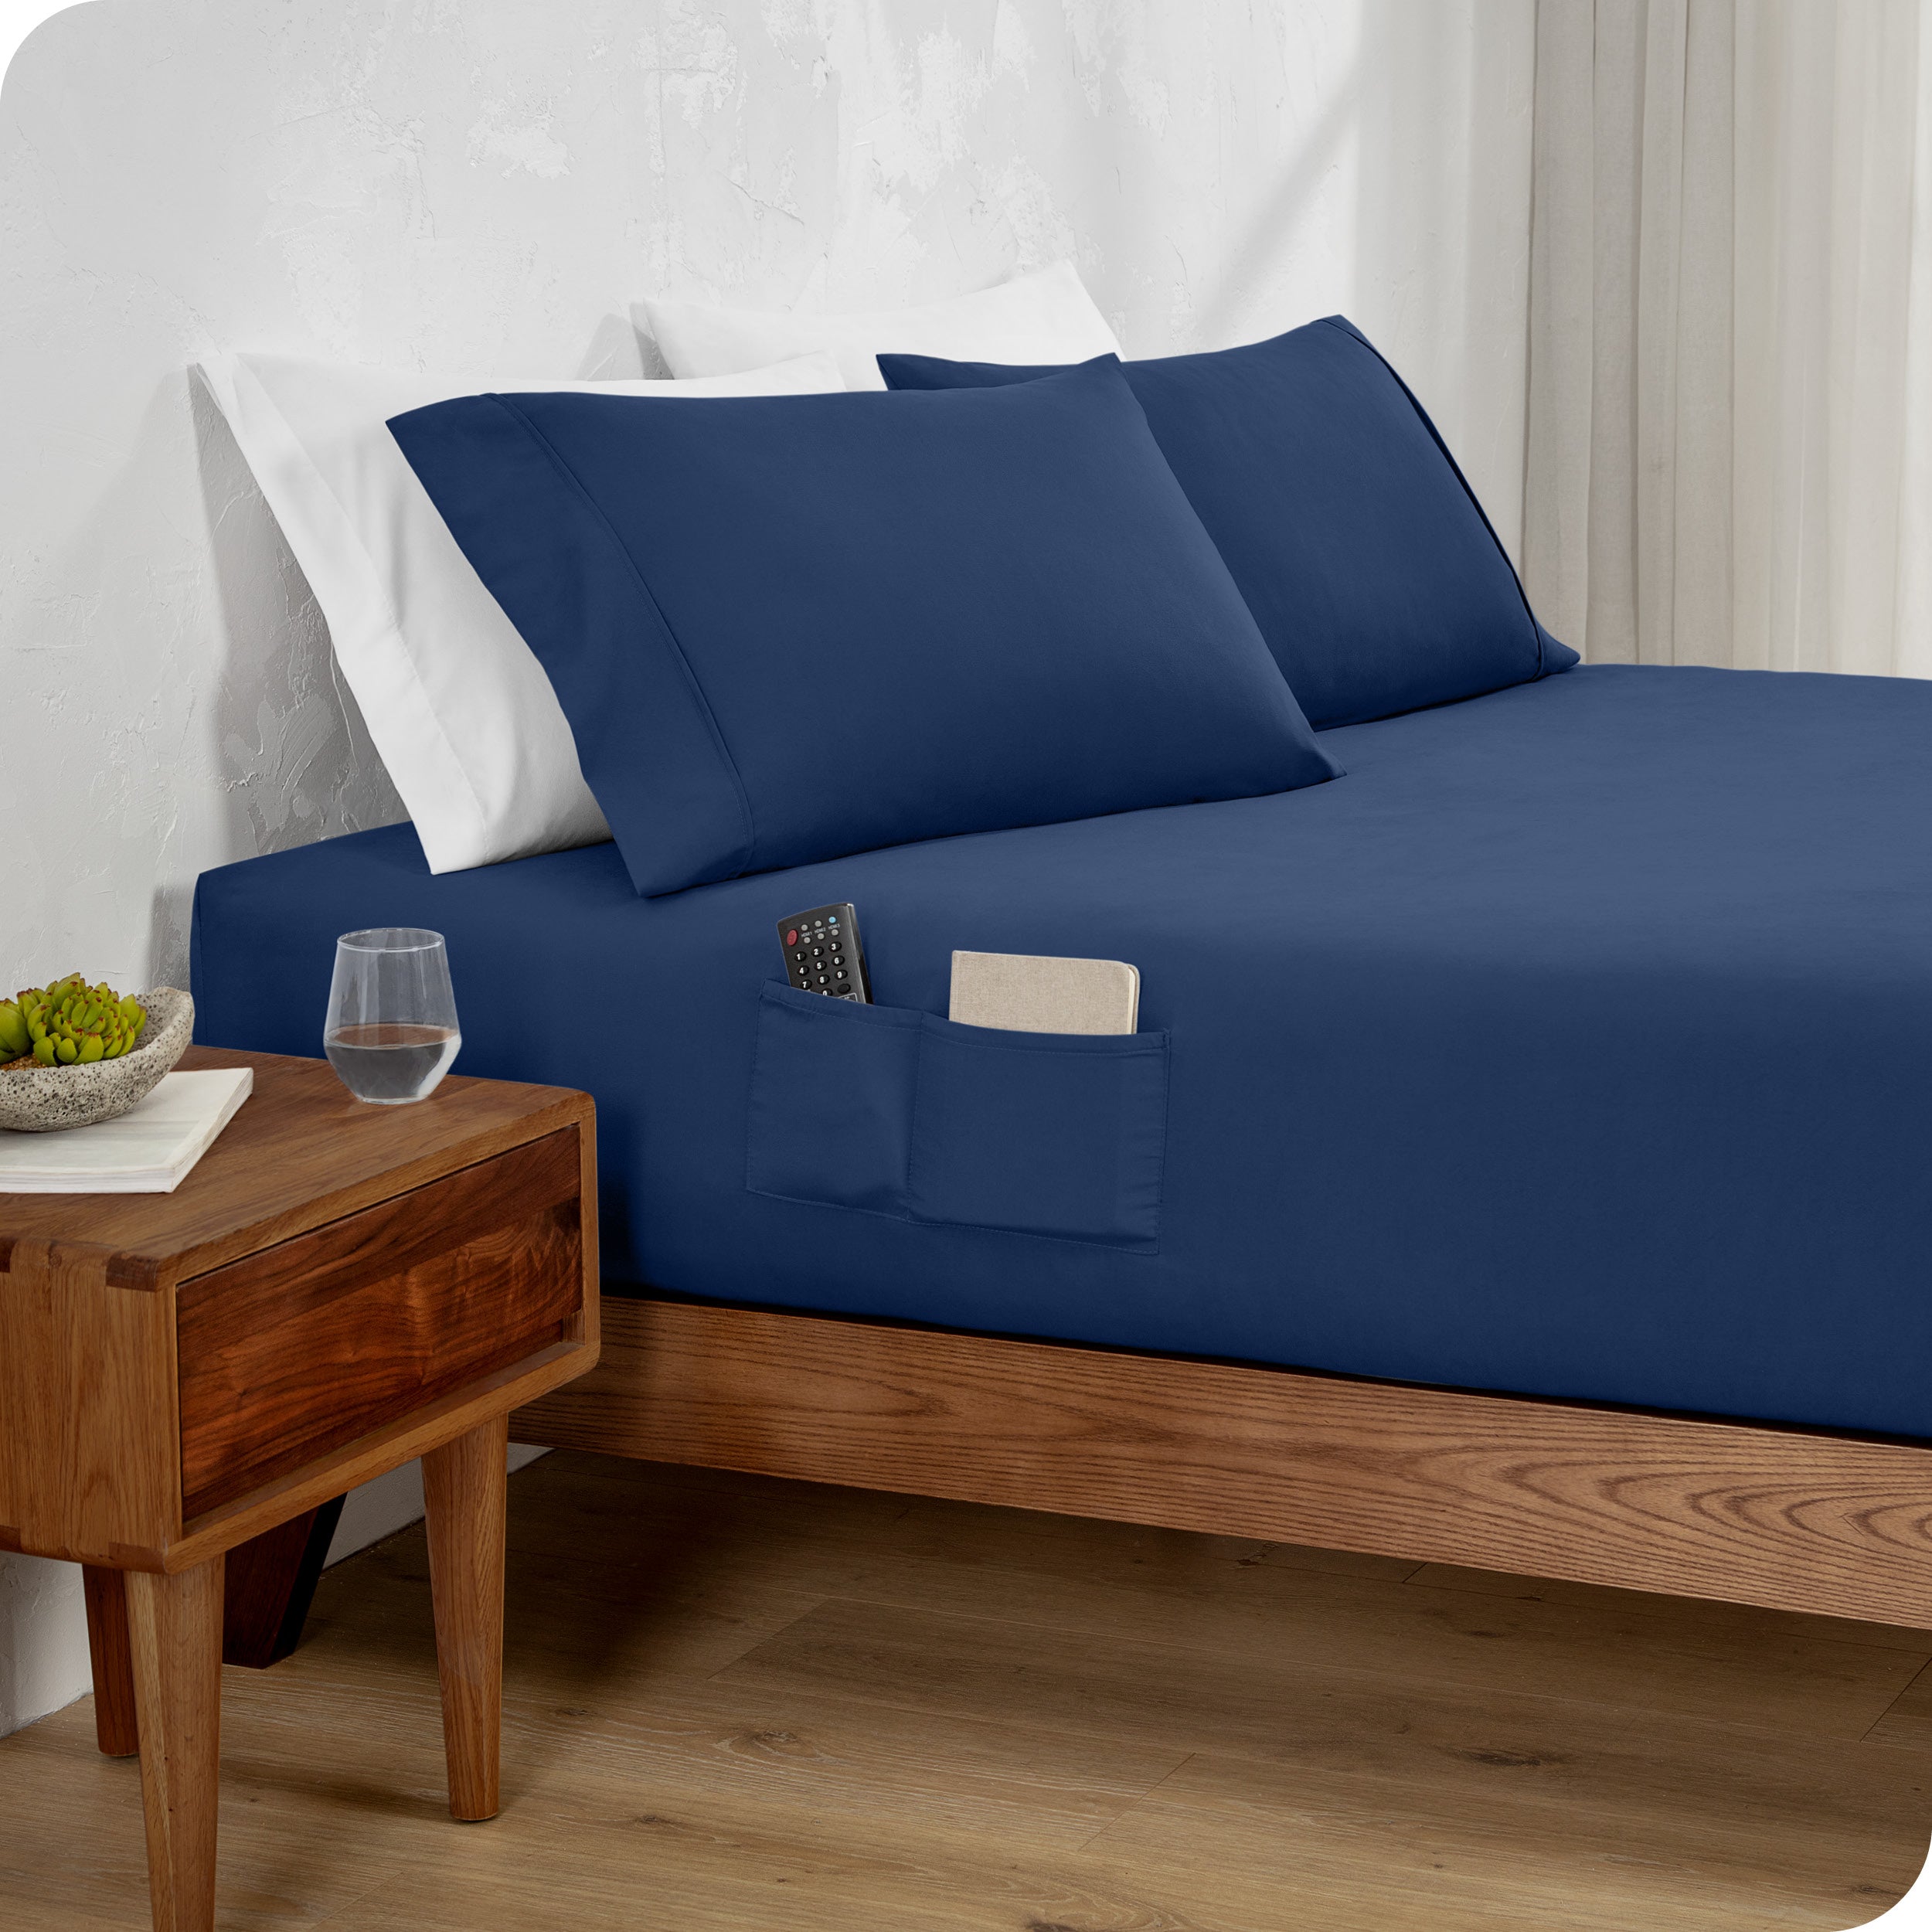 Bed made with a blue fitted sheet which has pockets on the side